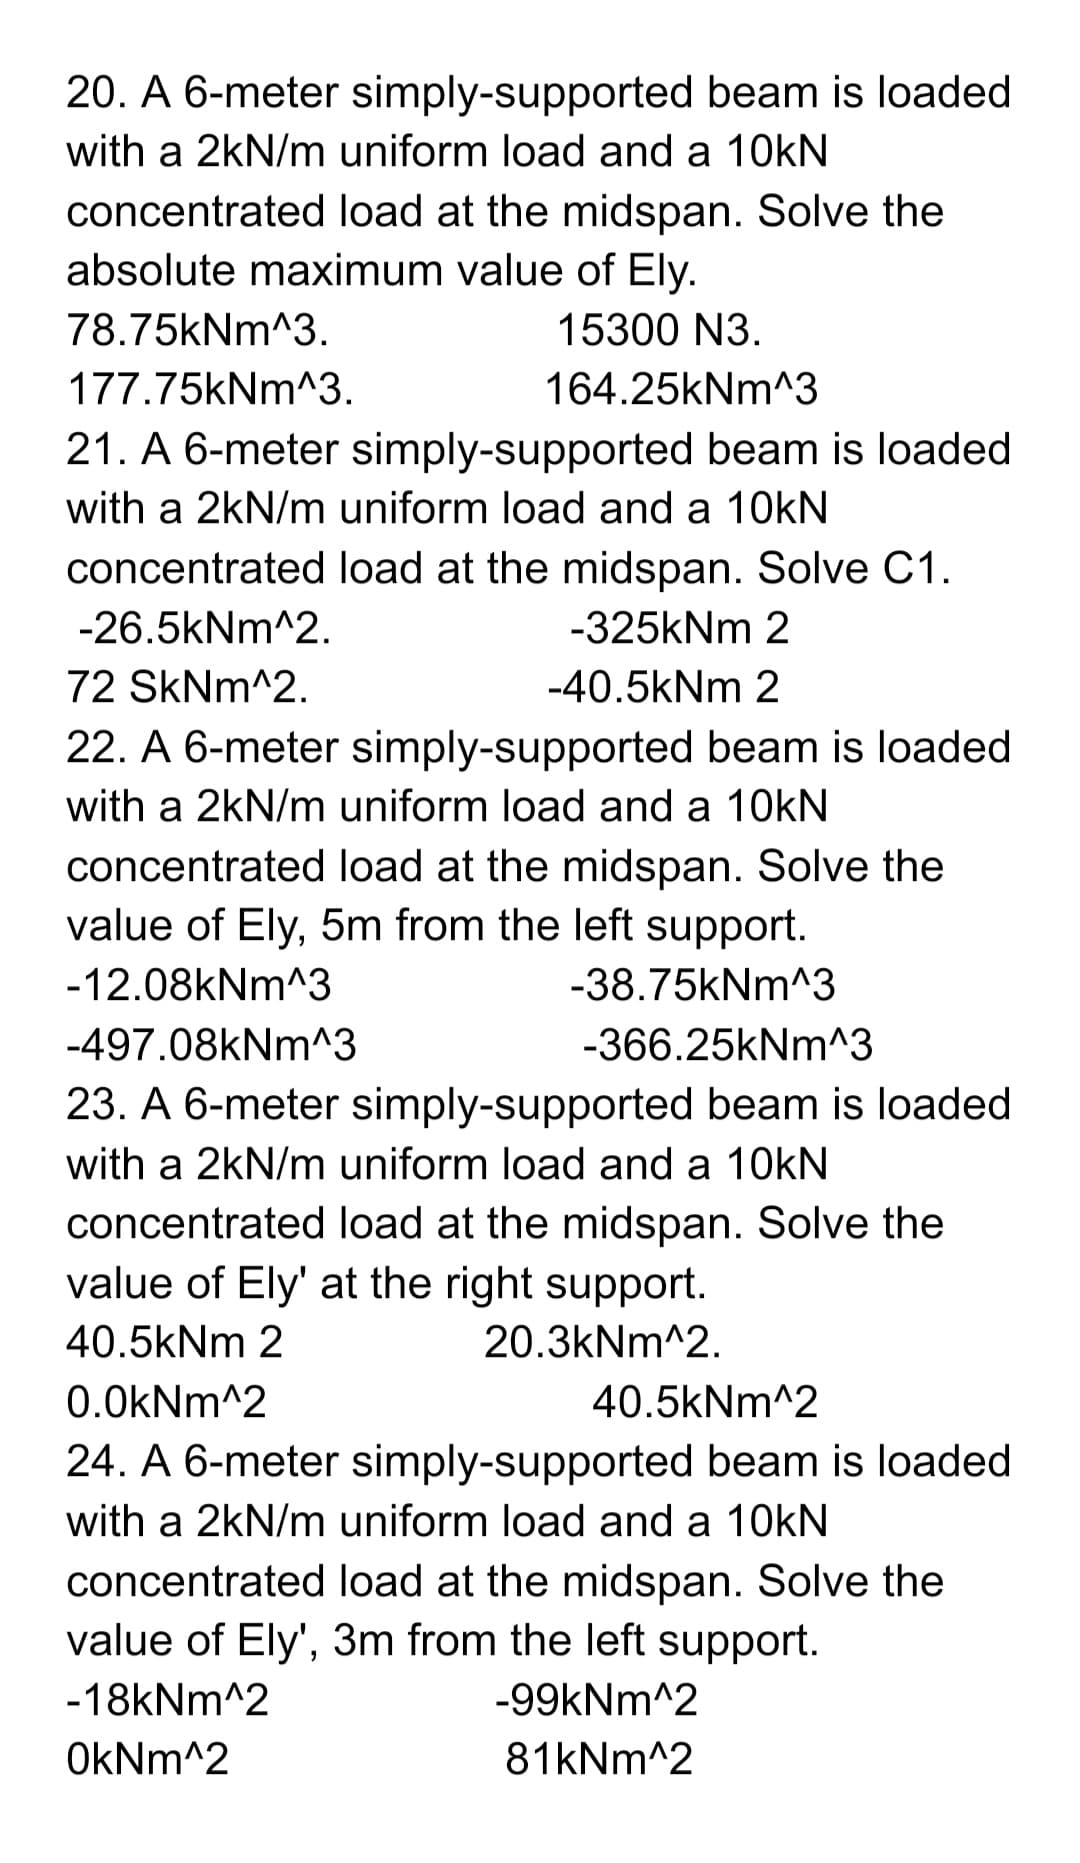 20. A 6-meter simply-supported beam is loaded
with a 2kN/m uniform load and a 10kN
concentrated load at the midspan. Solve the
absolute maximum value of Ely.
78.75kNm^3.
15300 N3.
177.75kNm^3.
164.25kNm^3
21. A 6-meter simply-supported beam is loaded
with a 2kN/m uniform load and a 10kN
concentrated load at the midspan. Solve C1.
-26.5kNm^2.
-325kNm 2
72 SkNm^2.
-40.5kNm 2
22. A 6-meter simply-supported beam is loaded
with a 2kN/m uniform load and a 10kN
concentrated load at the midspan. Solve the
value of Ely, 5m from the left support.
-12.08kNm^3
-38.75kNm^3
-497.08kNm^3
-366.25kNm^3
23. A 6-meter simply-supported beam is loaded
with a 2kN/m uniform load and a 10kN
concentrated load at the midspan. Solve the
value of Ely' at the right support.
40.5kNm 2
20.3kNm^2.
0.0kNm^2
40.5kNm^2
24. A 6-meter simply-supported beam is loaded
with a 2kN/m uniform load and a 10kN
concentrated load at the midspan. Solve the
value of Ely', 3m from the left support.
-18kNm^2
-99kNm^2
OkNm^2
81kNm^2
